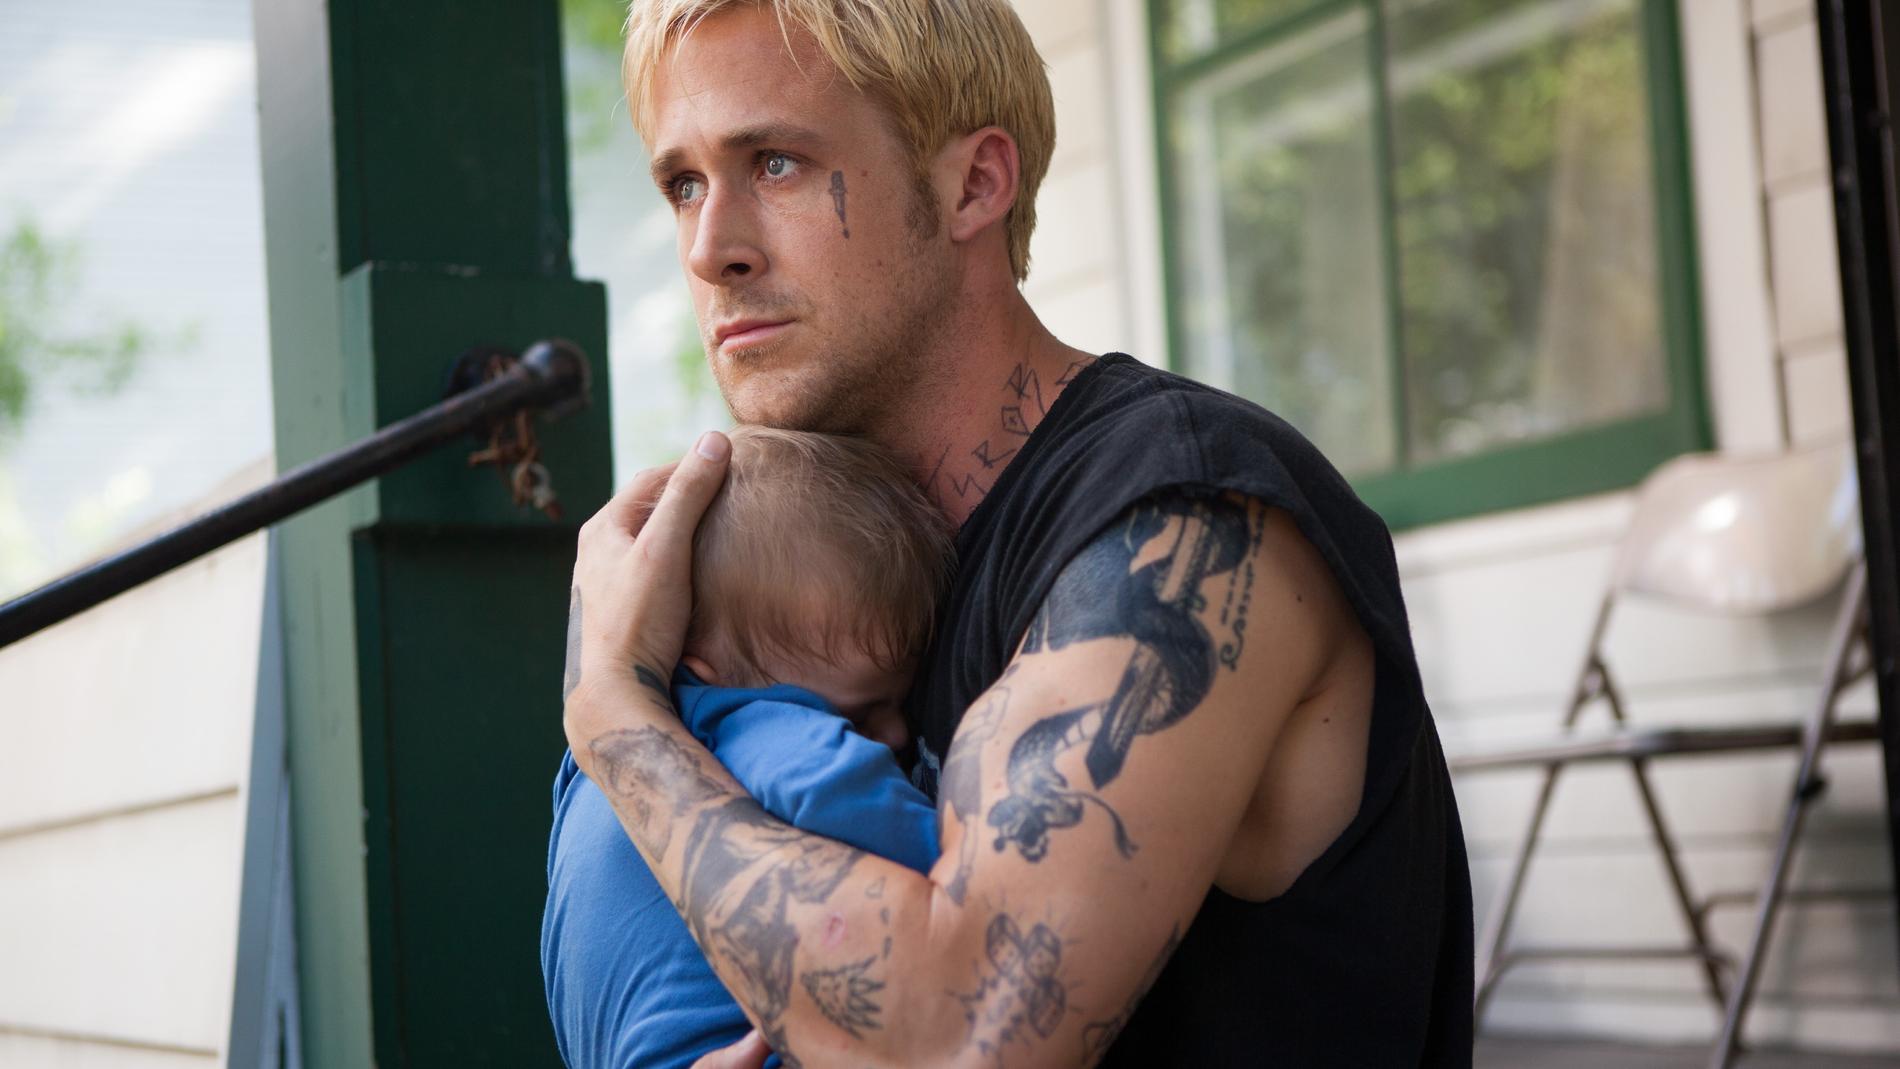 ”The place beyond the pines”.